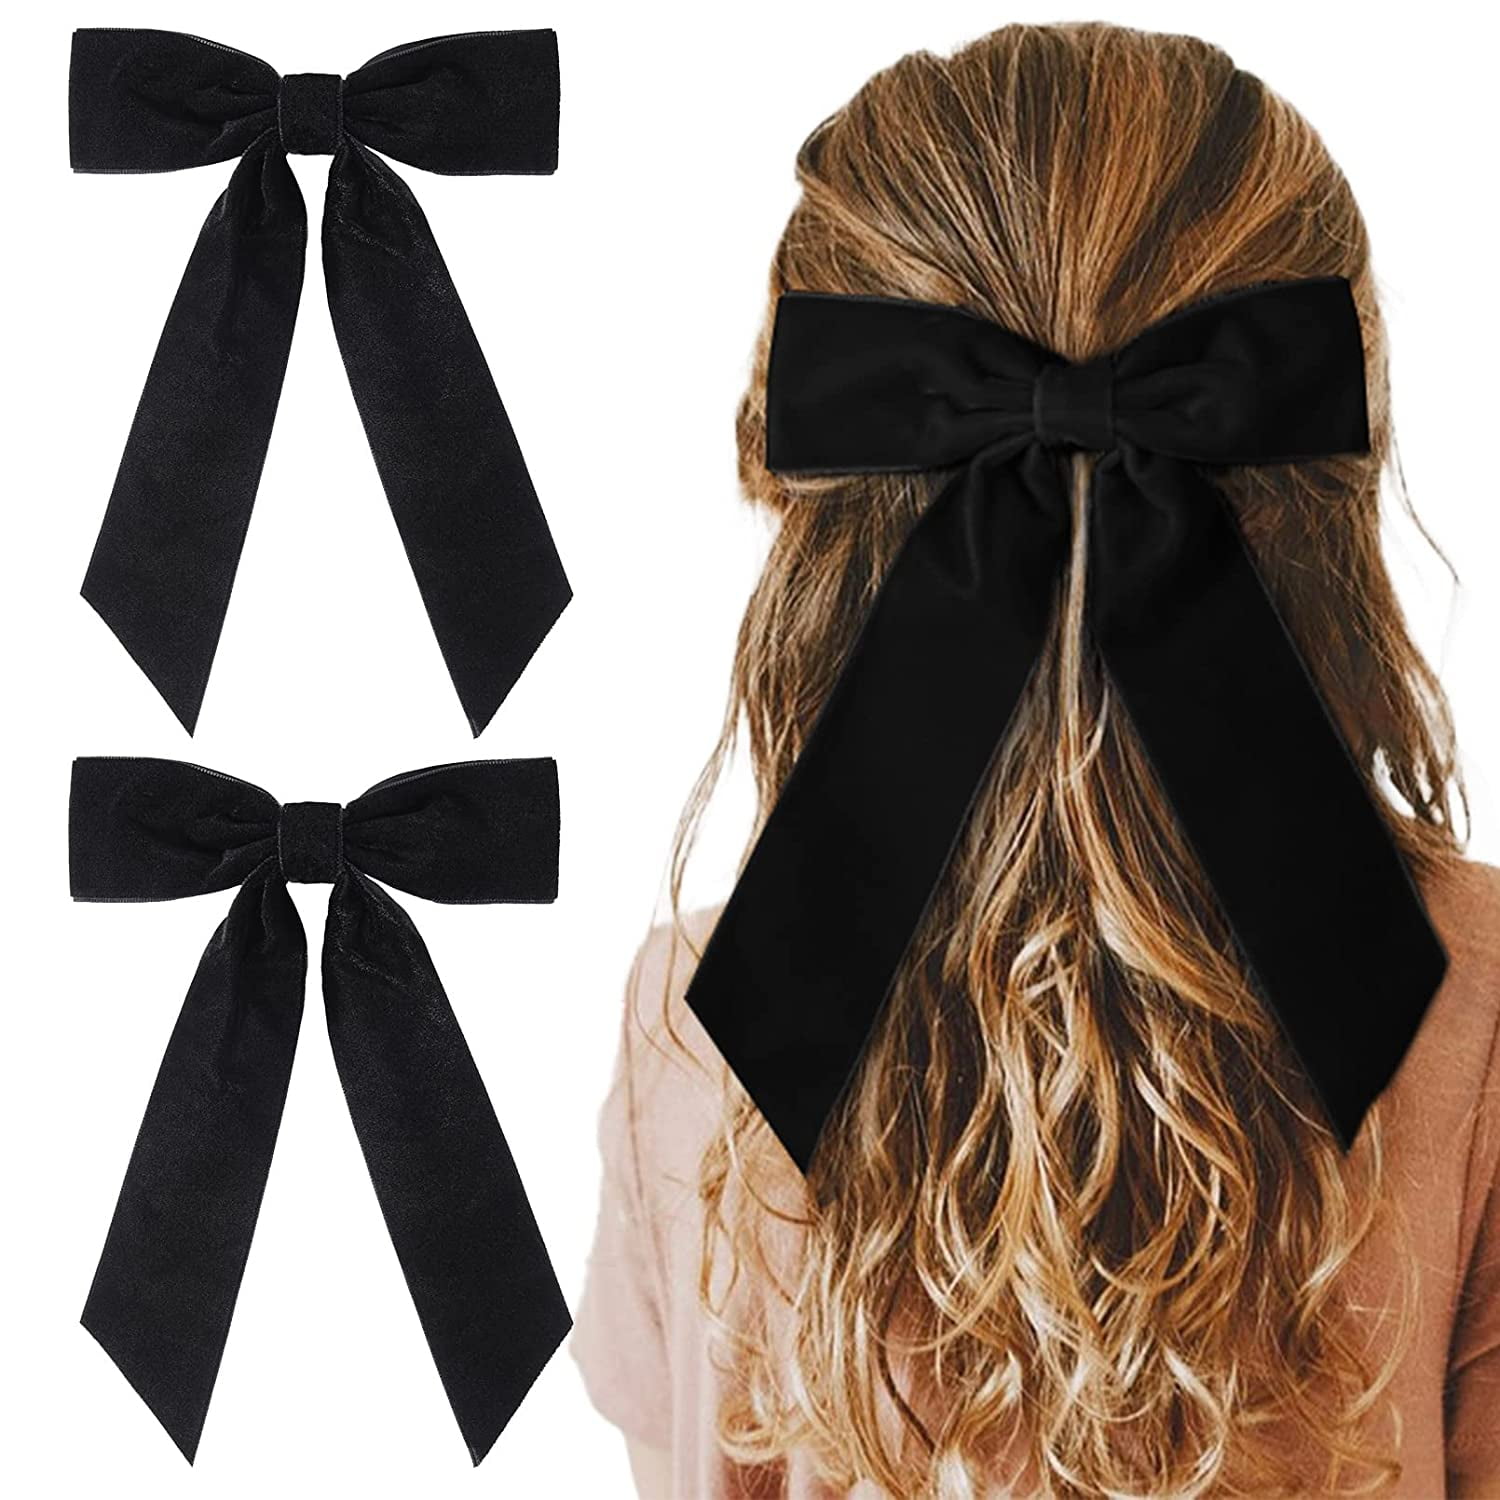 HipGirl Velvet Ribbon for Crafts - Hipgirl 5 Yards 7/8 Black Ribbon for  Holiday Gift Package Wrapping, Woven Headbands, Hair Bow